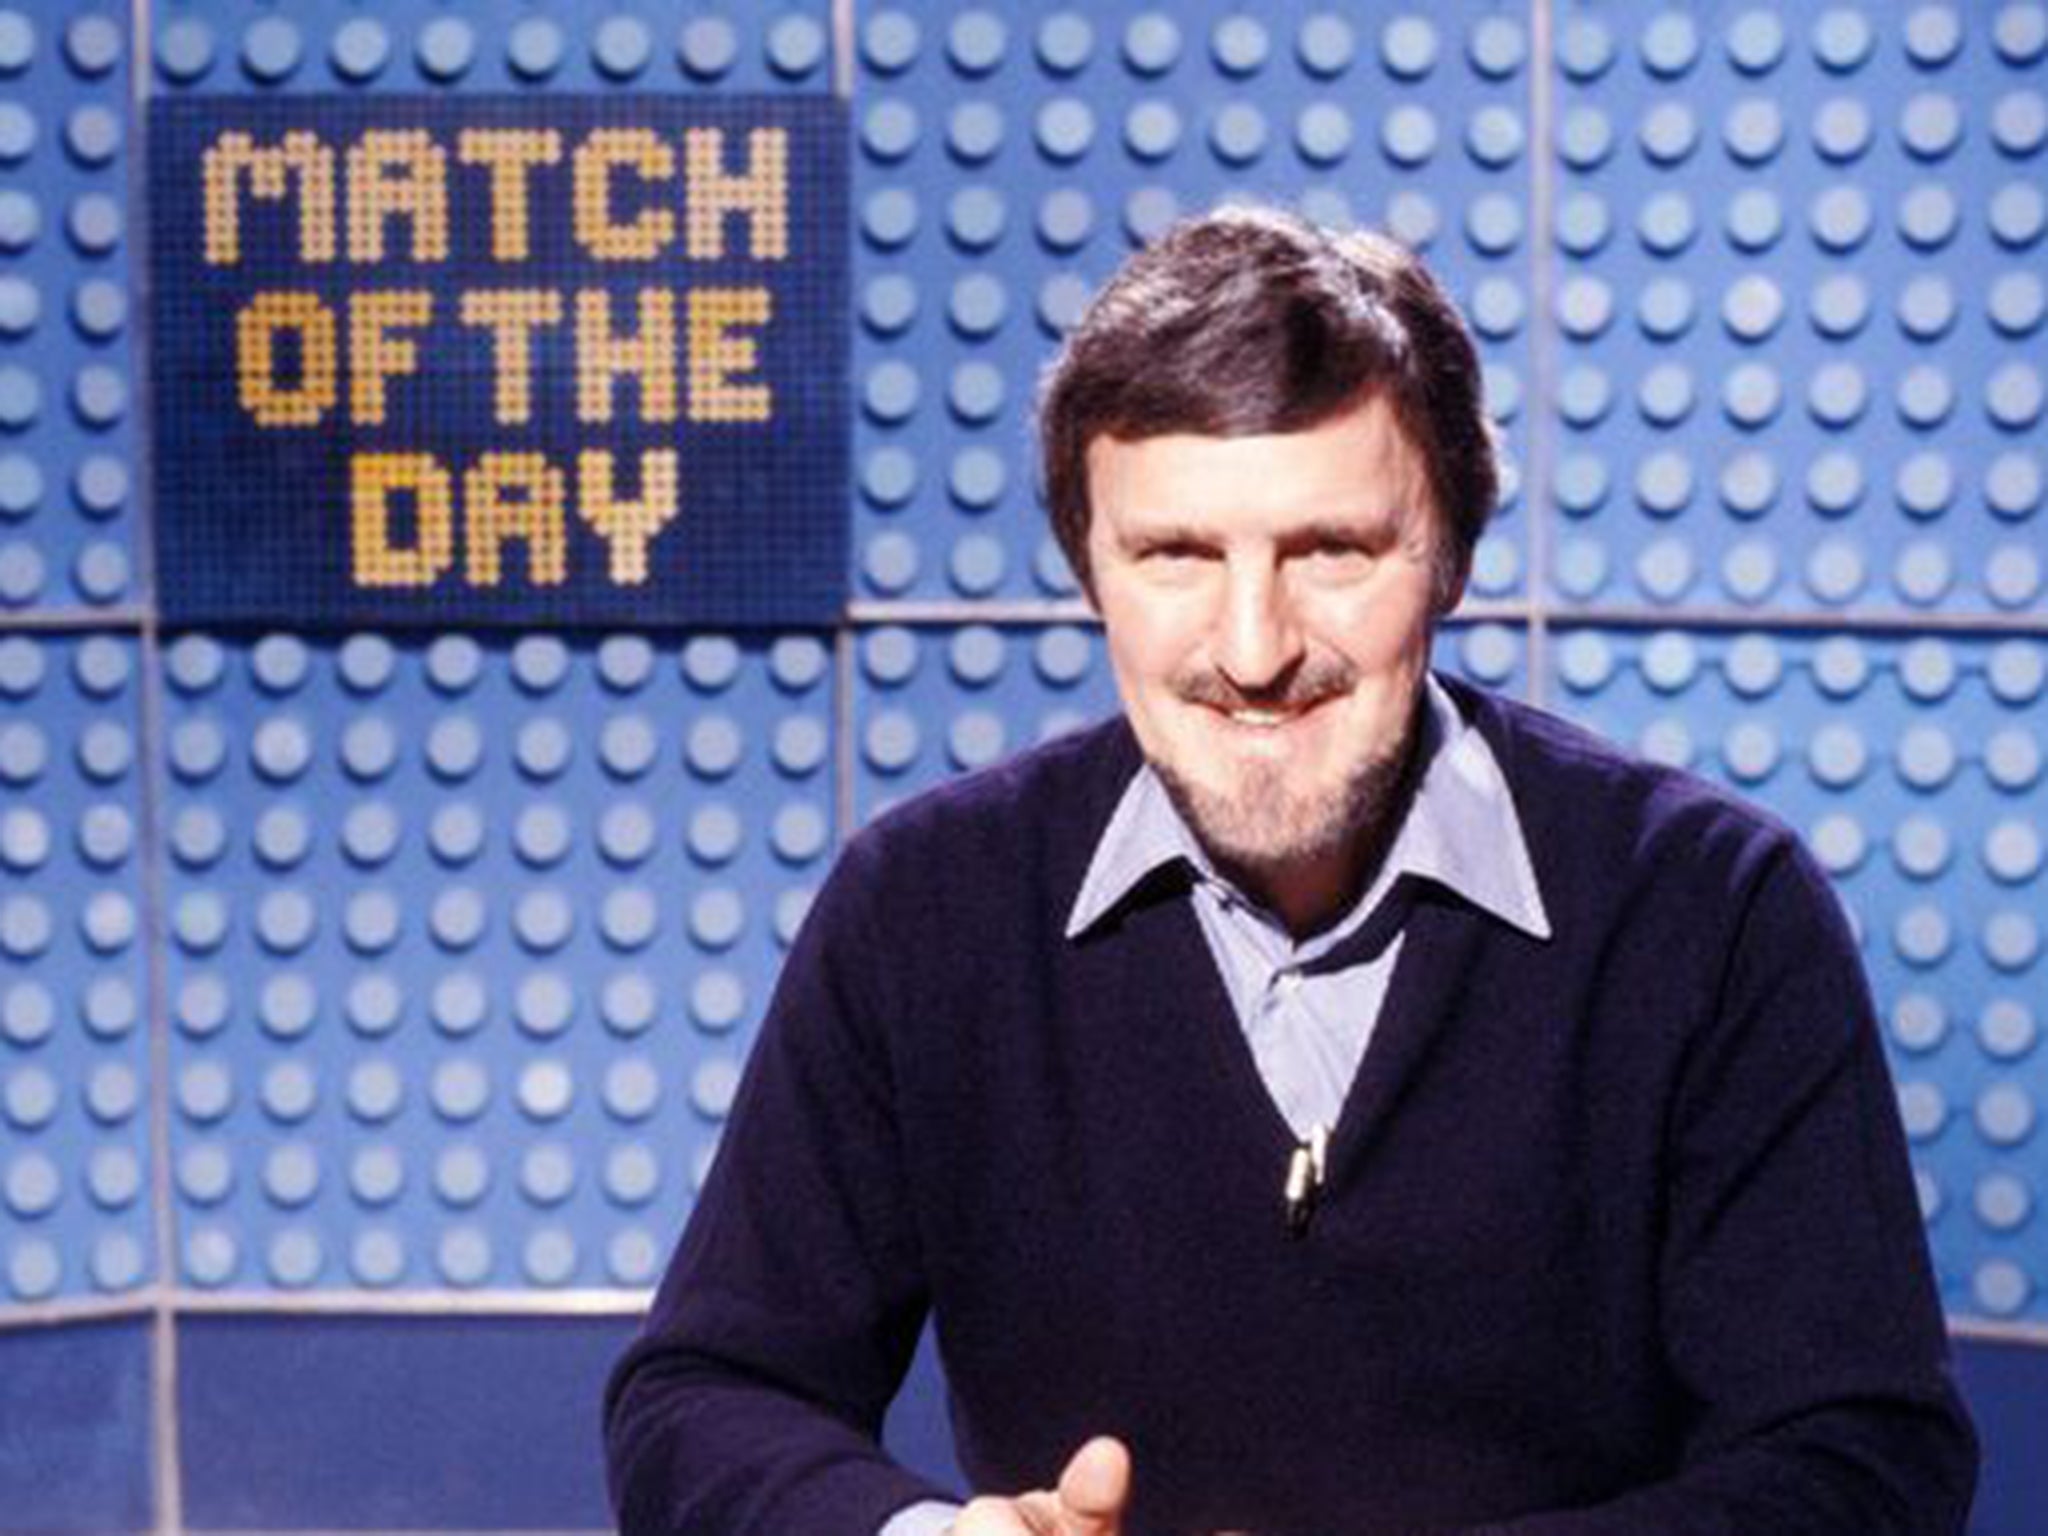 Jimmy Hill spent 15 years as Match of the Day's main presenter